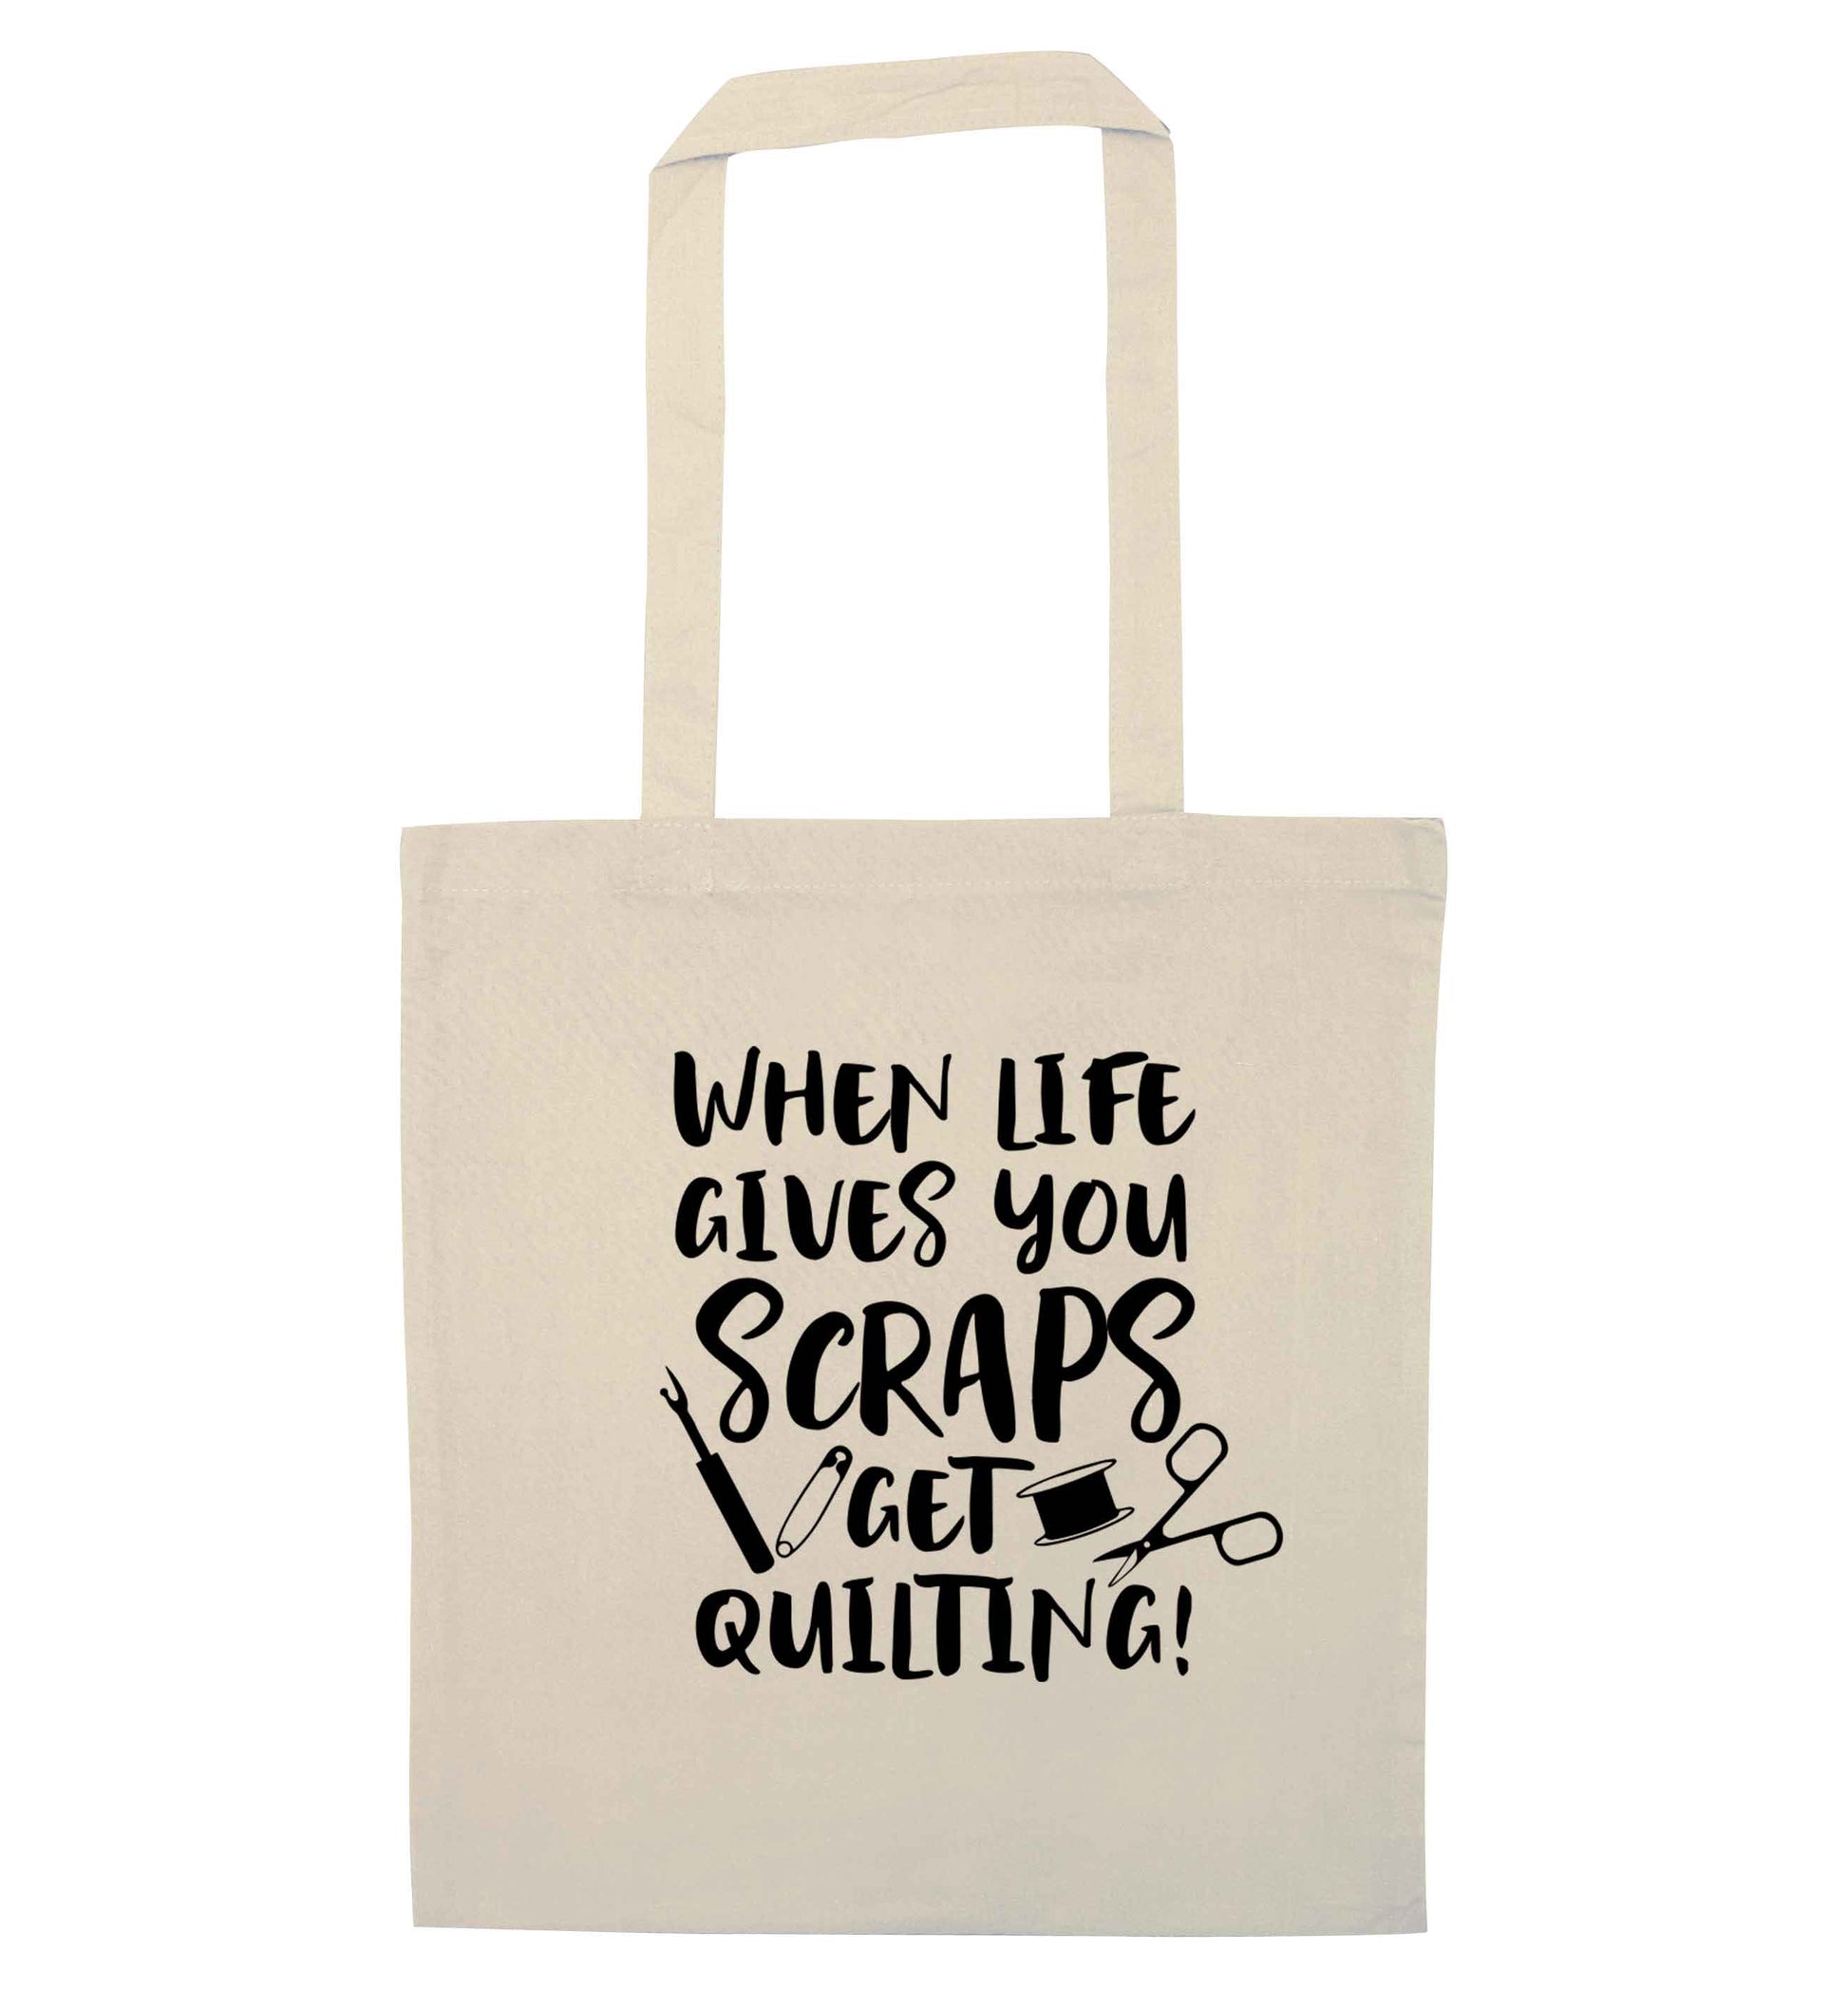 When life gives you scraps get quilting! natural tote bag